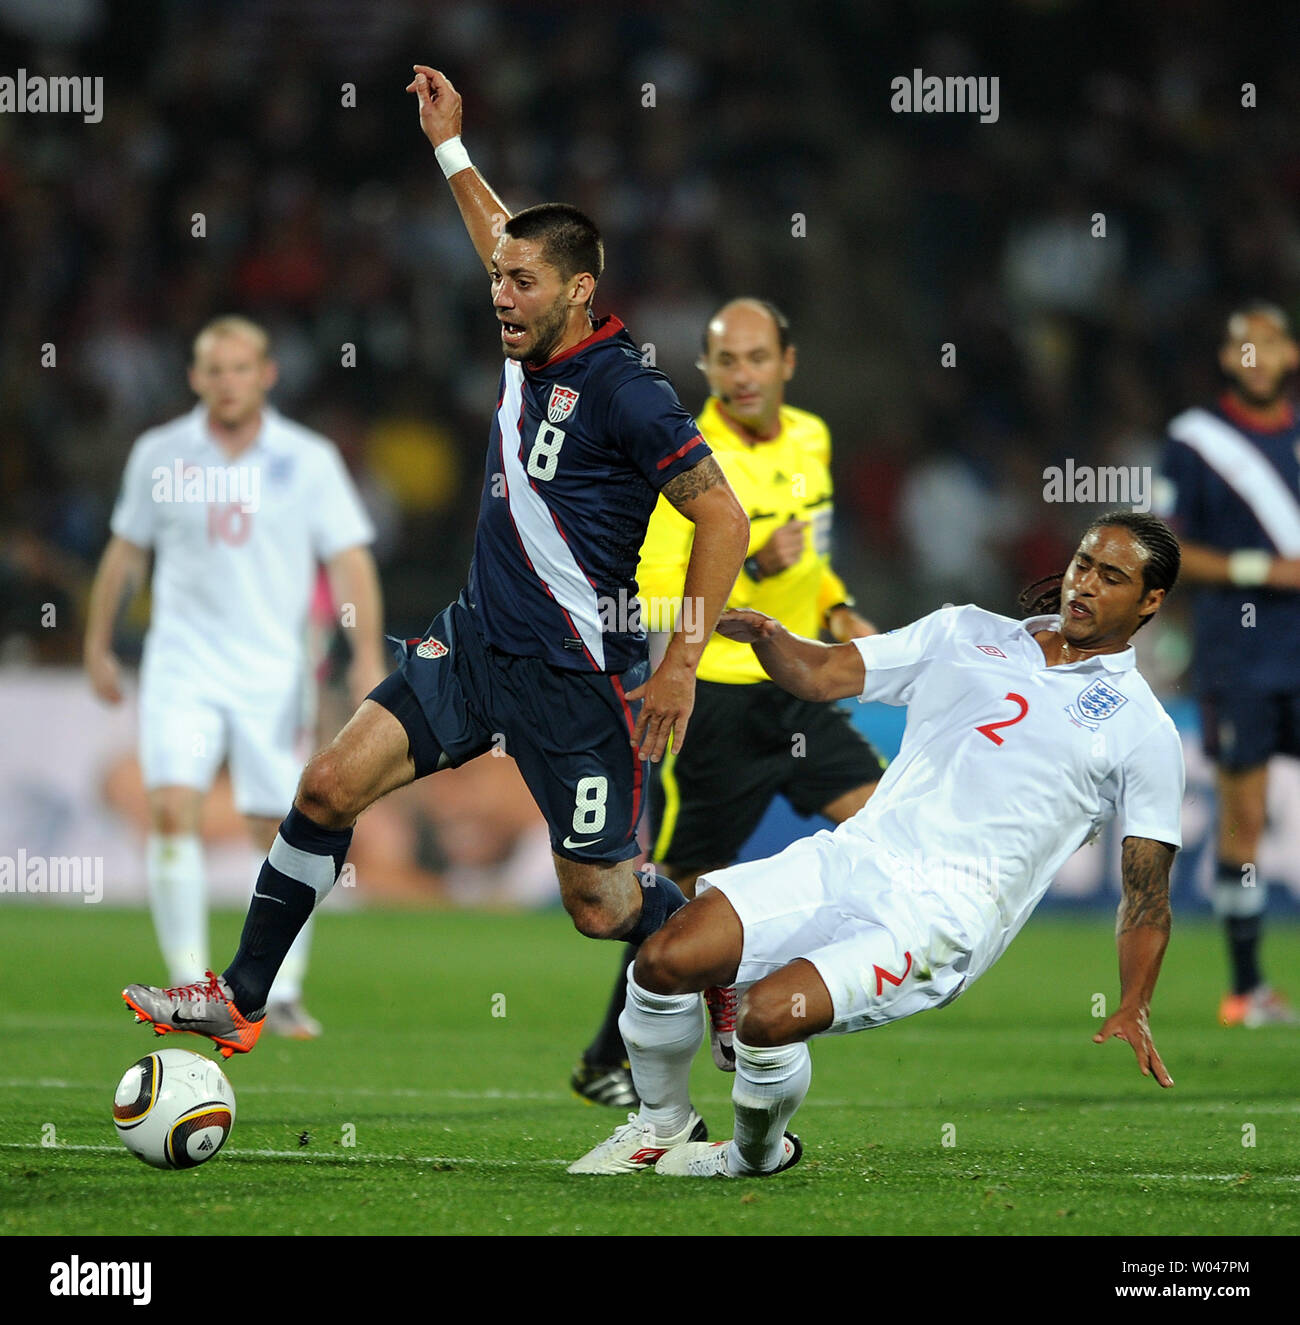 Glen Johnson of England battles with Clint Dempsey of USA during the Group B match at the Royal Bafokeng Stadium in Rustenburg, South Africa on June 12, 2010. UPI/Chris Brunskill Stock Photo